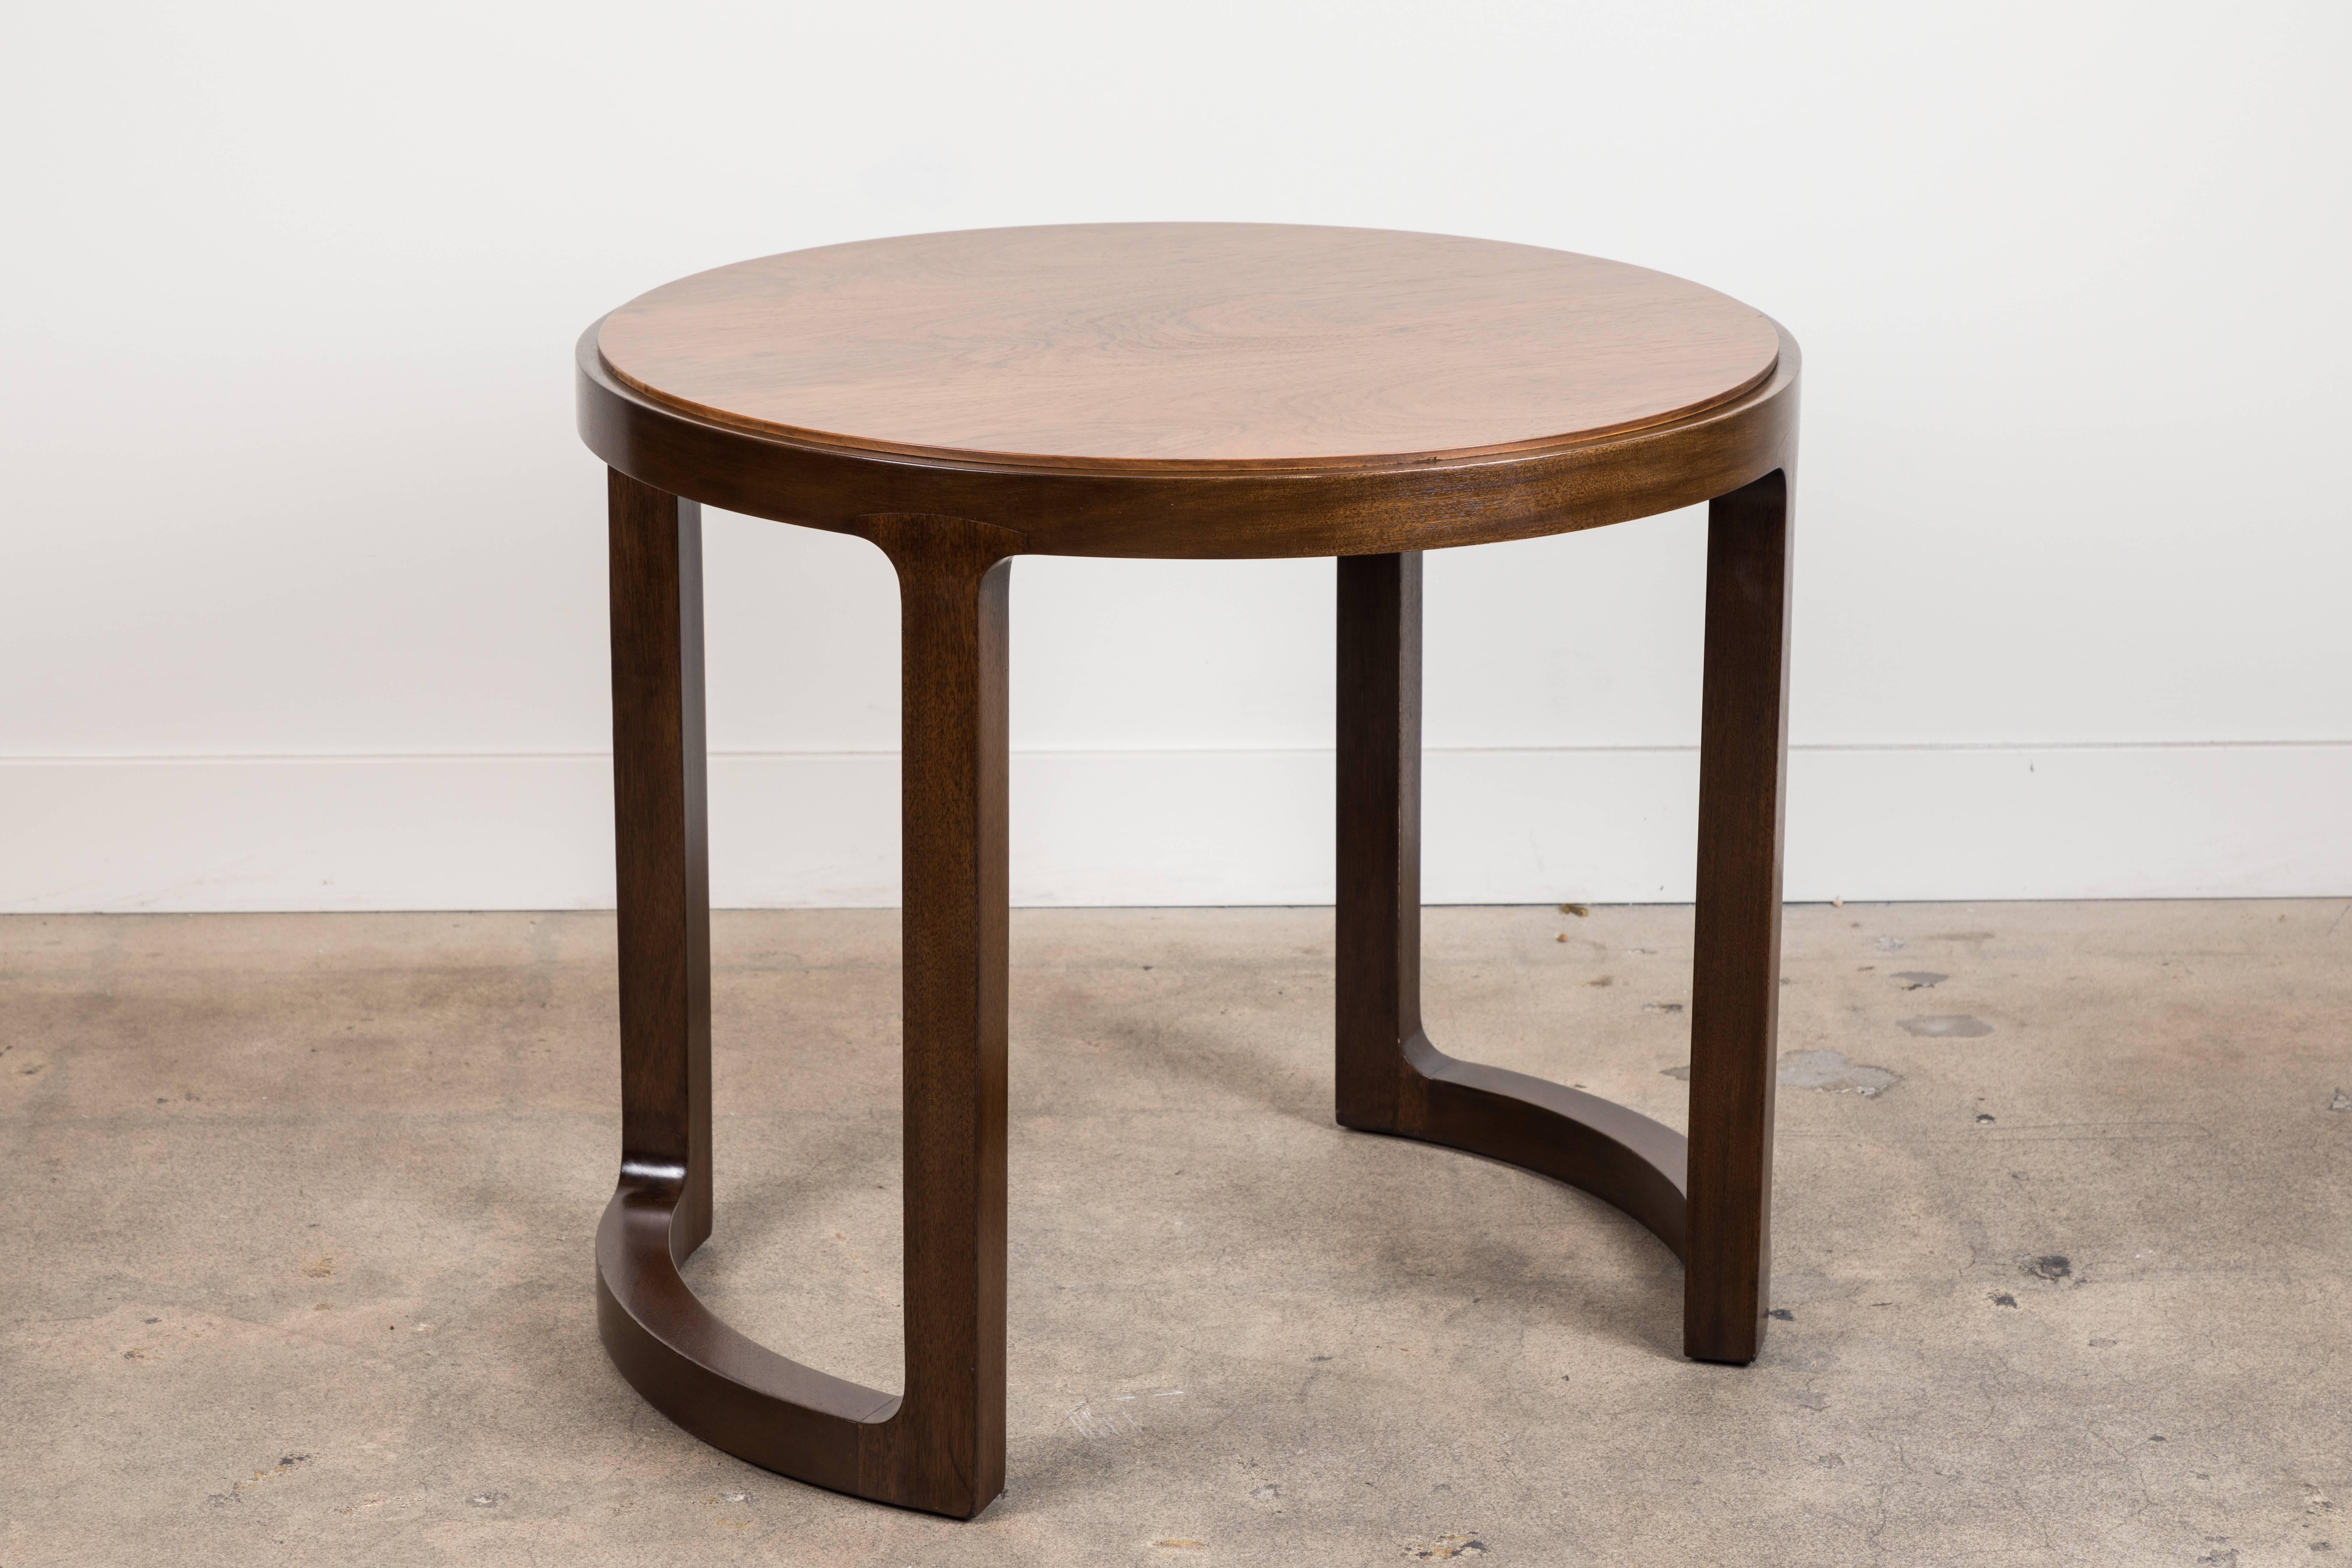 American Pair of Rosewood and Mahogany Side Table by Edward Wormley for Dunbar